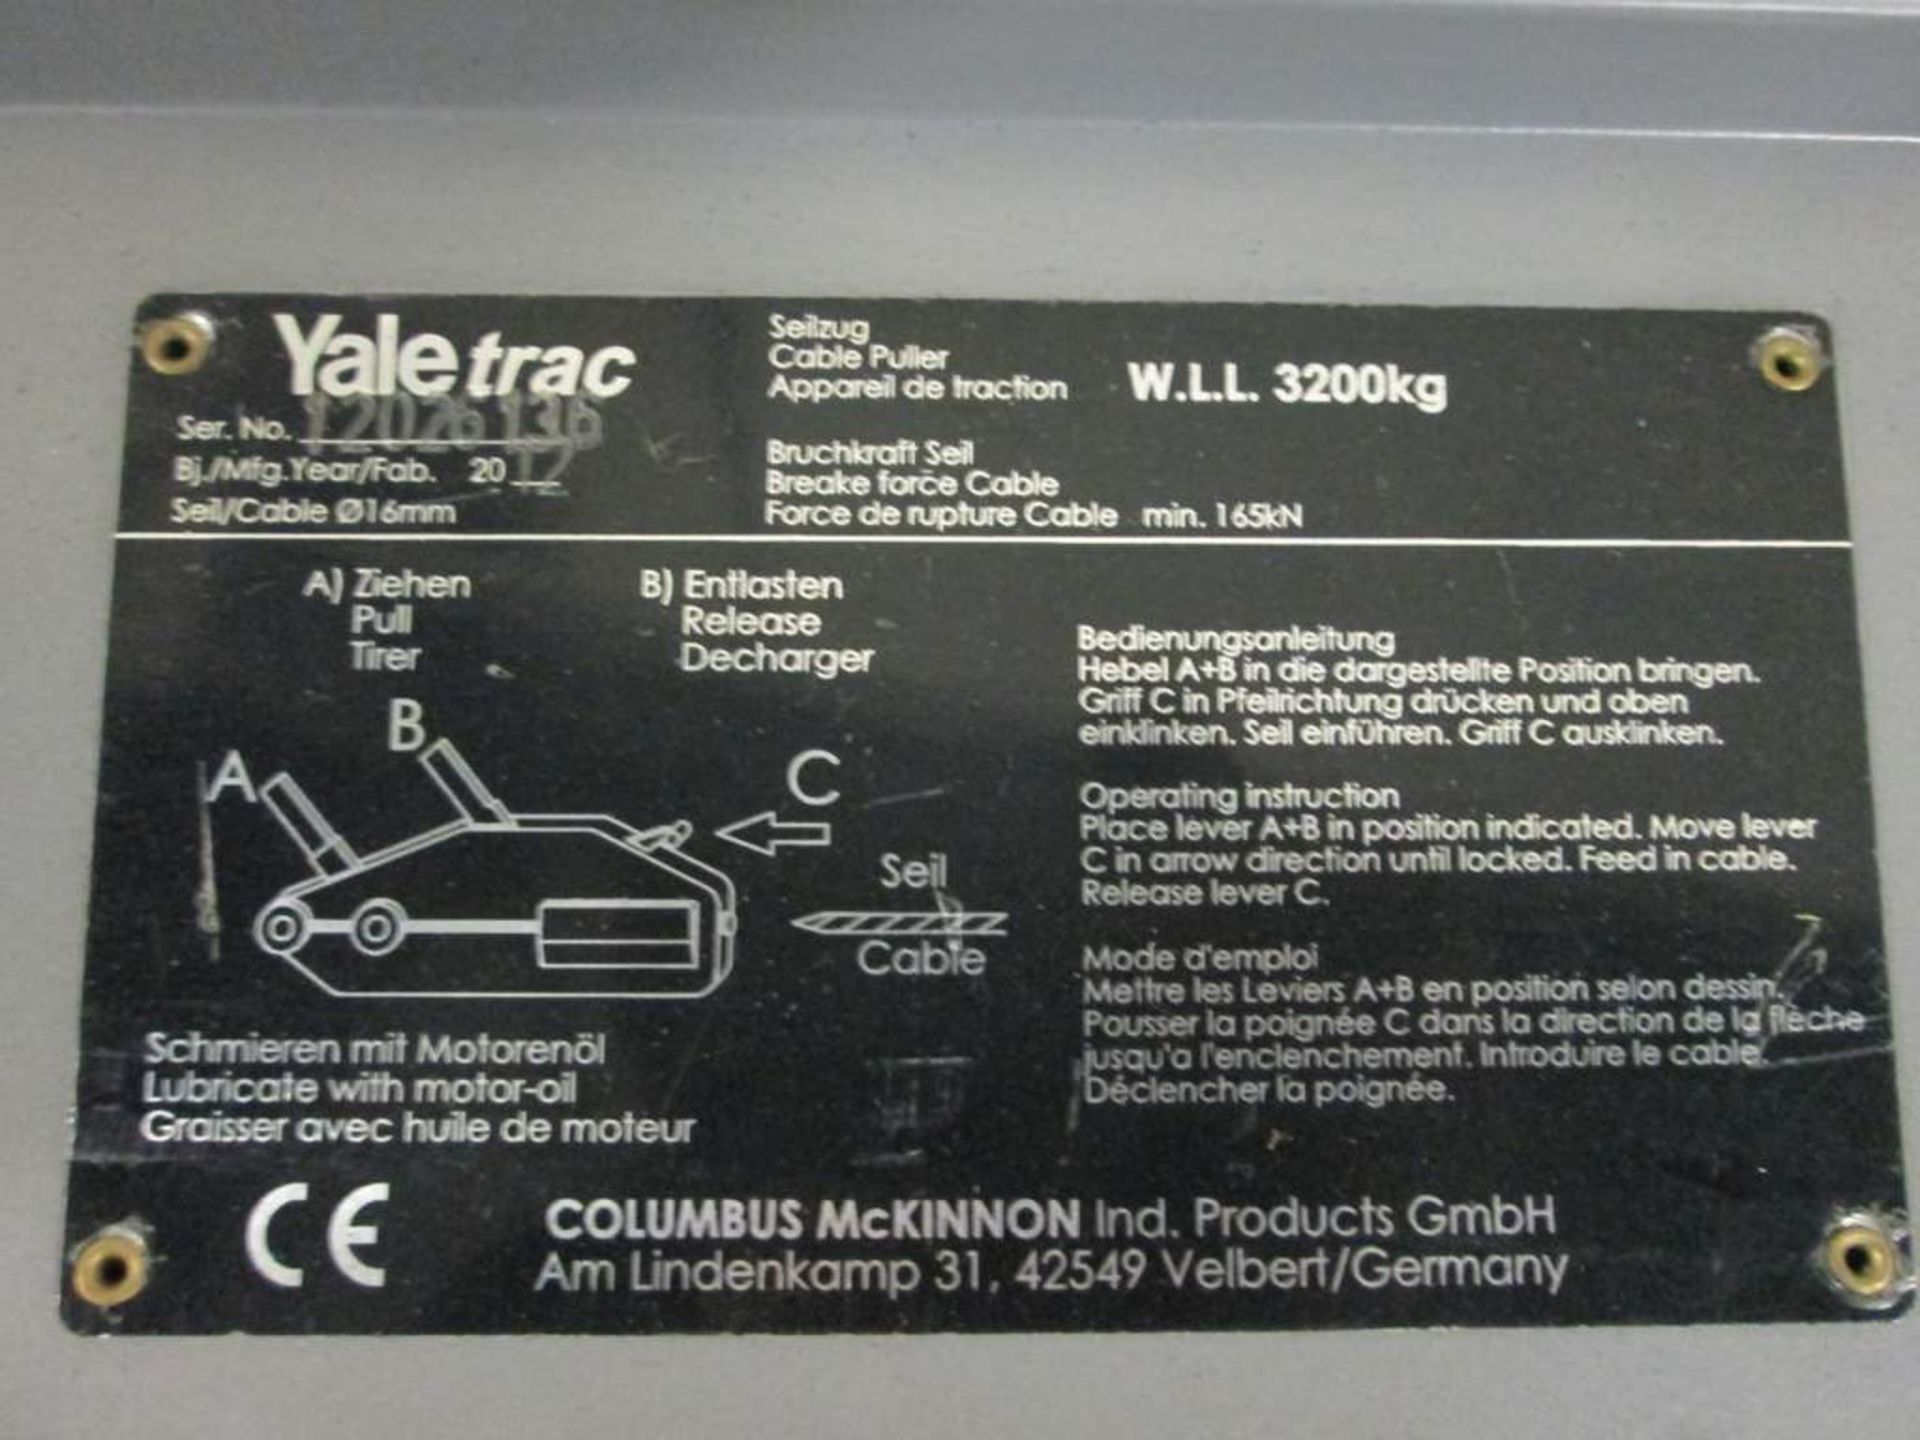 Yale track cable / wire puller 3200kg - Image 2 of 3